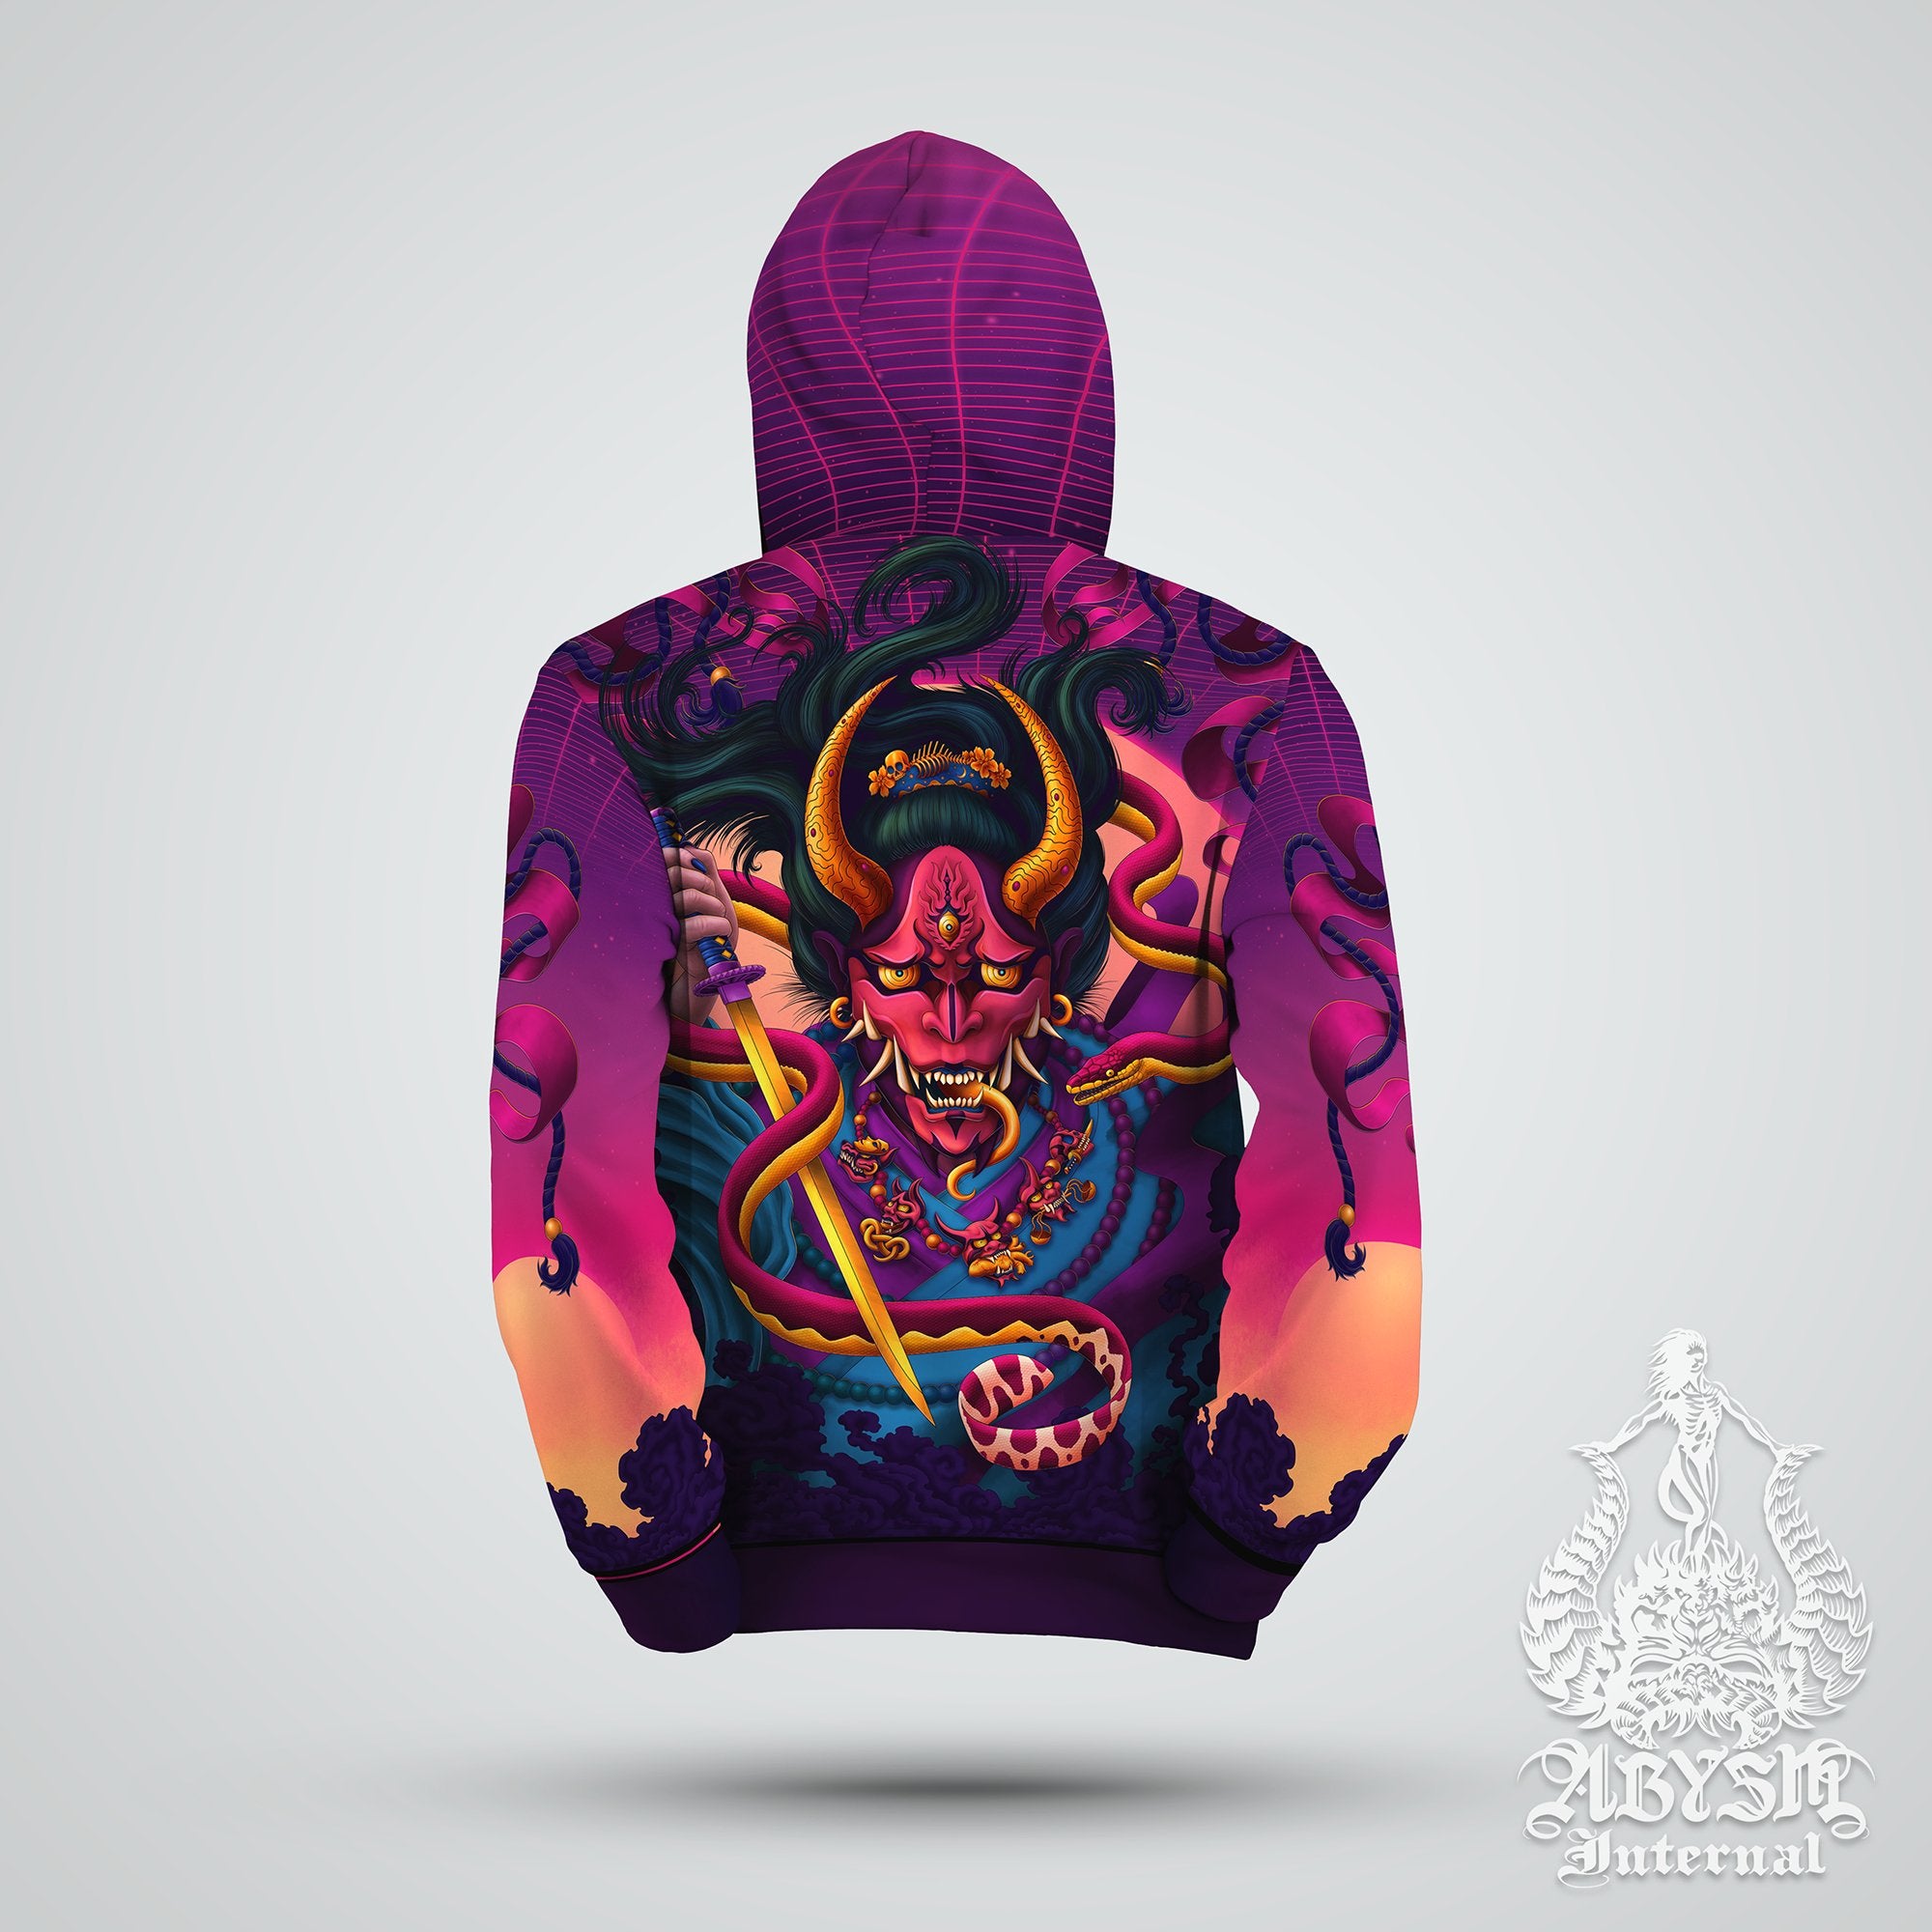 Psychedelic Hoodie, Rave Sweater, Psy Manga and Anime Streetwear, Japanese Demon Street Outfit, Hannya Pullover, Party Clothing, Unisex - Oni and Snake, Vaporwave - Abysm Internal